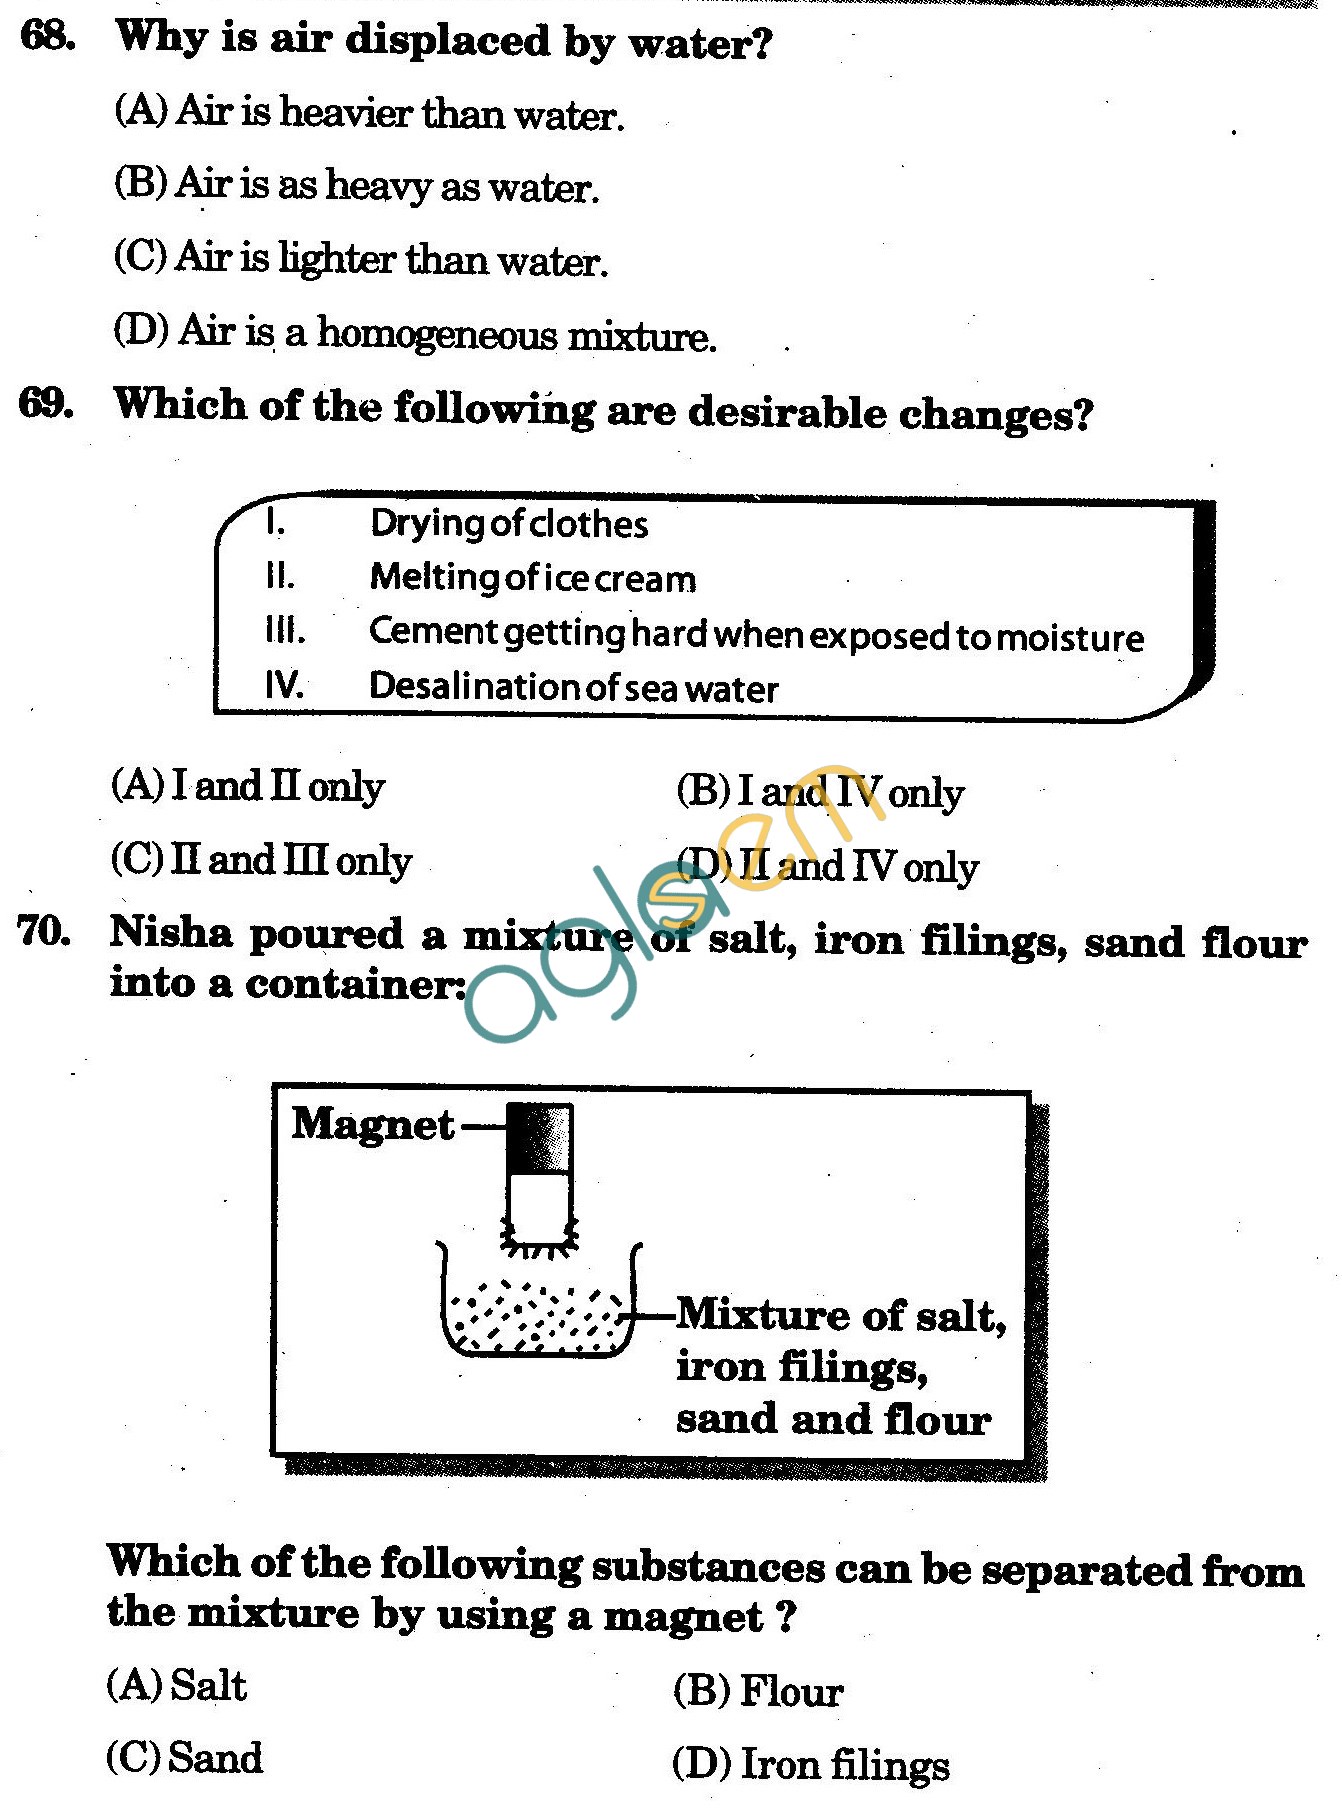 NSTSE 2010: Class VI Question Paper with Answers - Chemistry